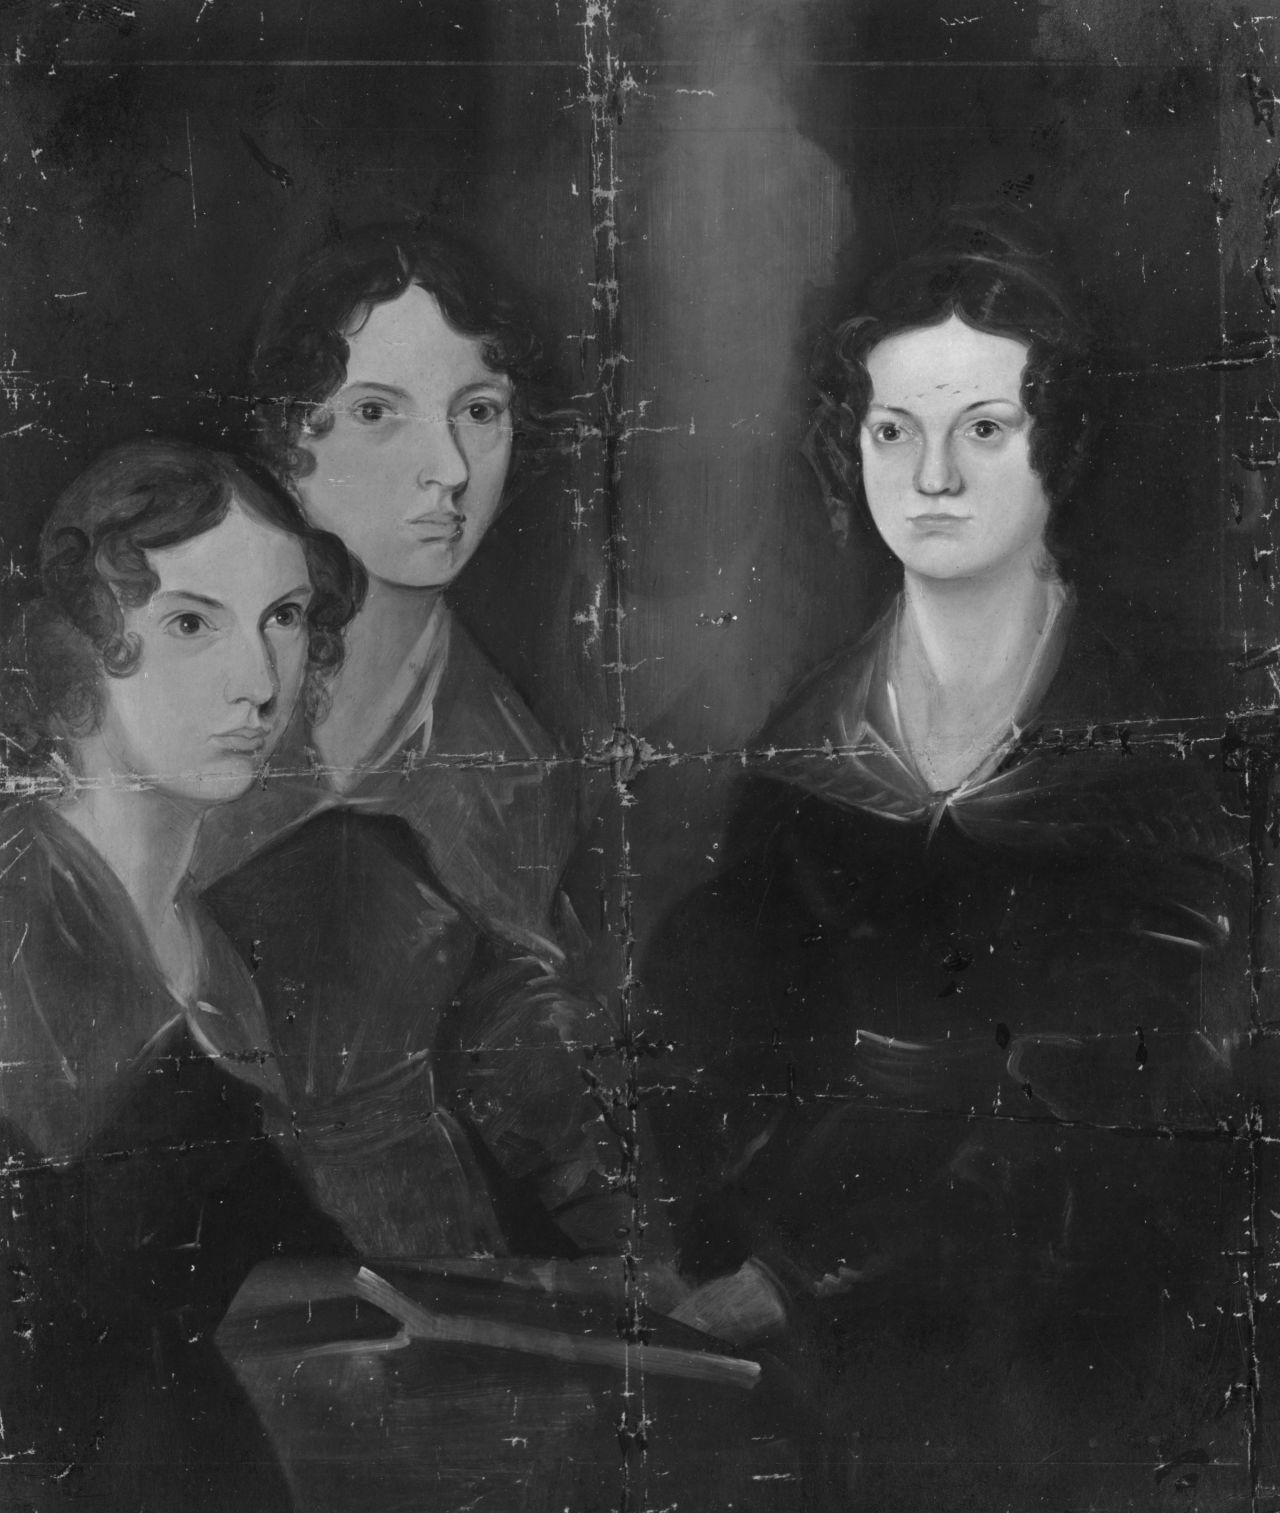 While "Jane Eyre" and "Wuthering Heights", written by Charlotte and Emily Bronte respectively, remain amongst the most popular books of all time, their male aliases almost deprived them of the critical claim they deserved. 